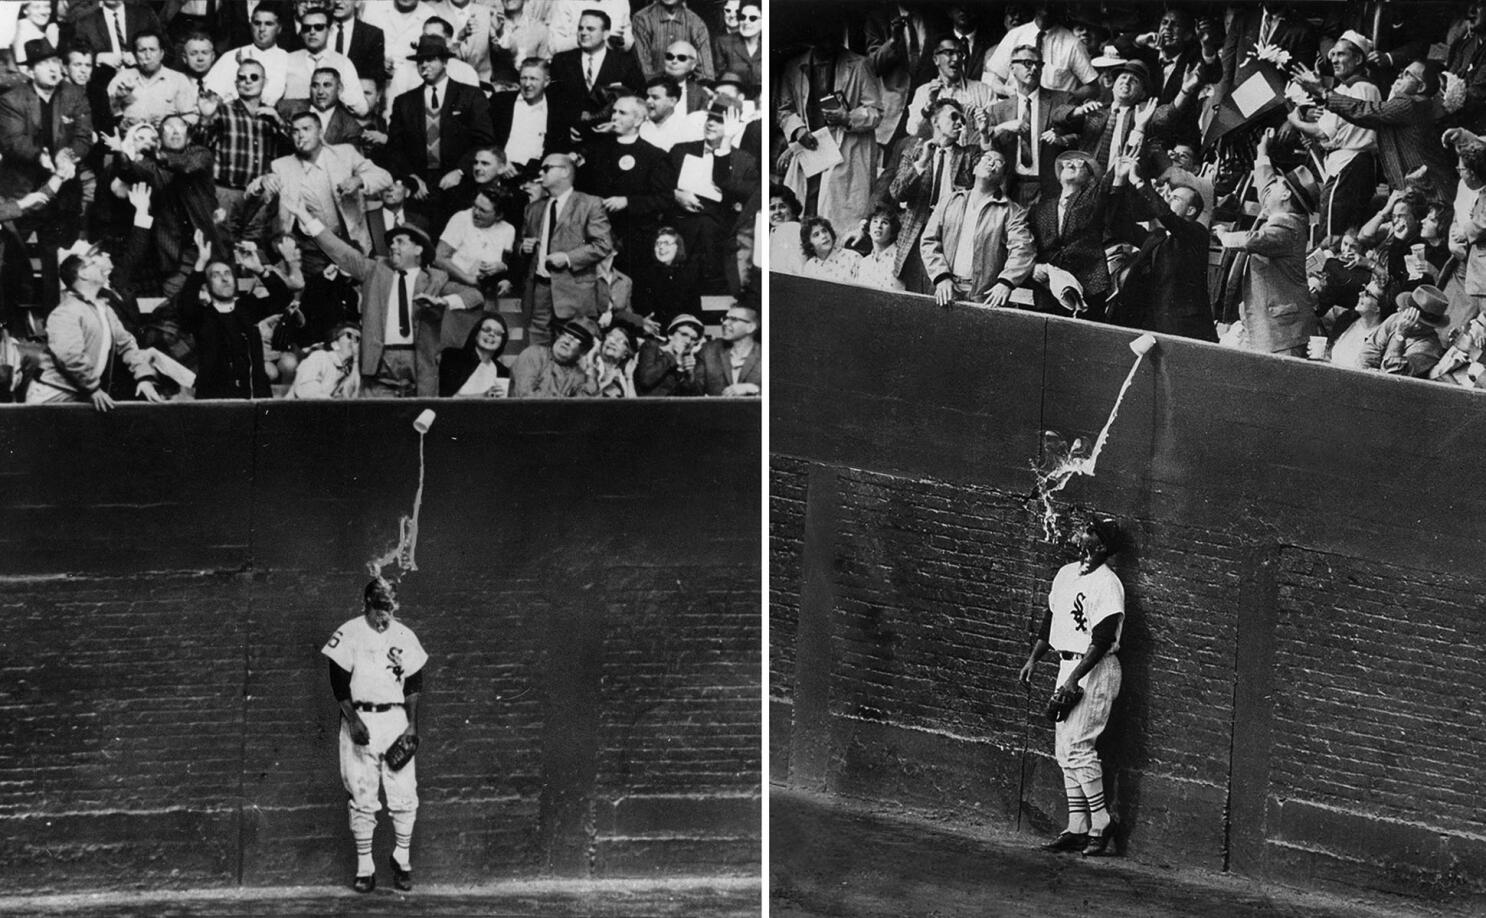 From the Archives: Beer and baseball at the 1959 World Series